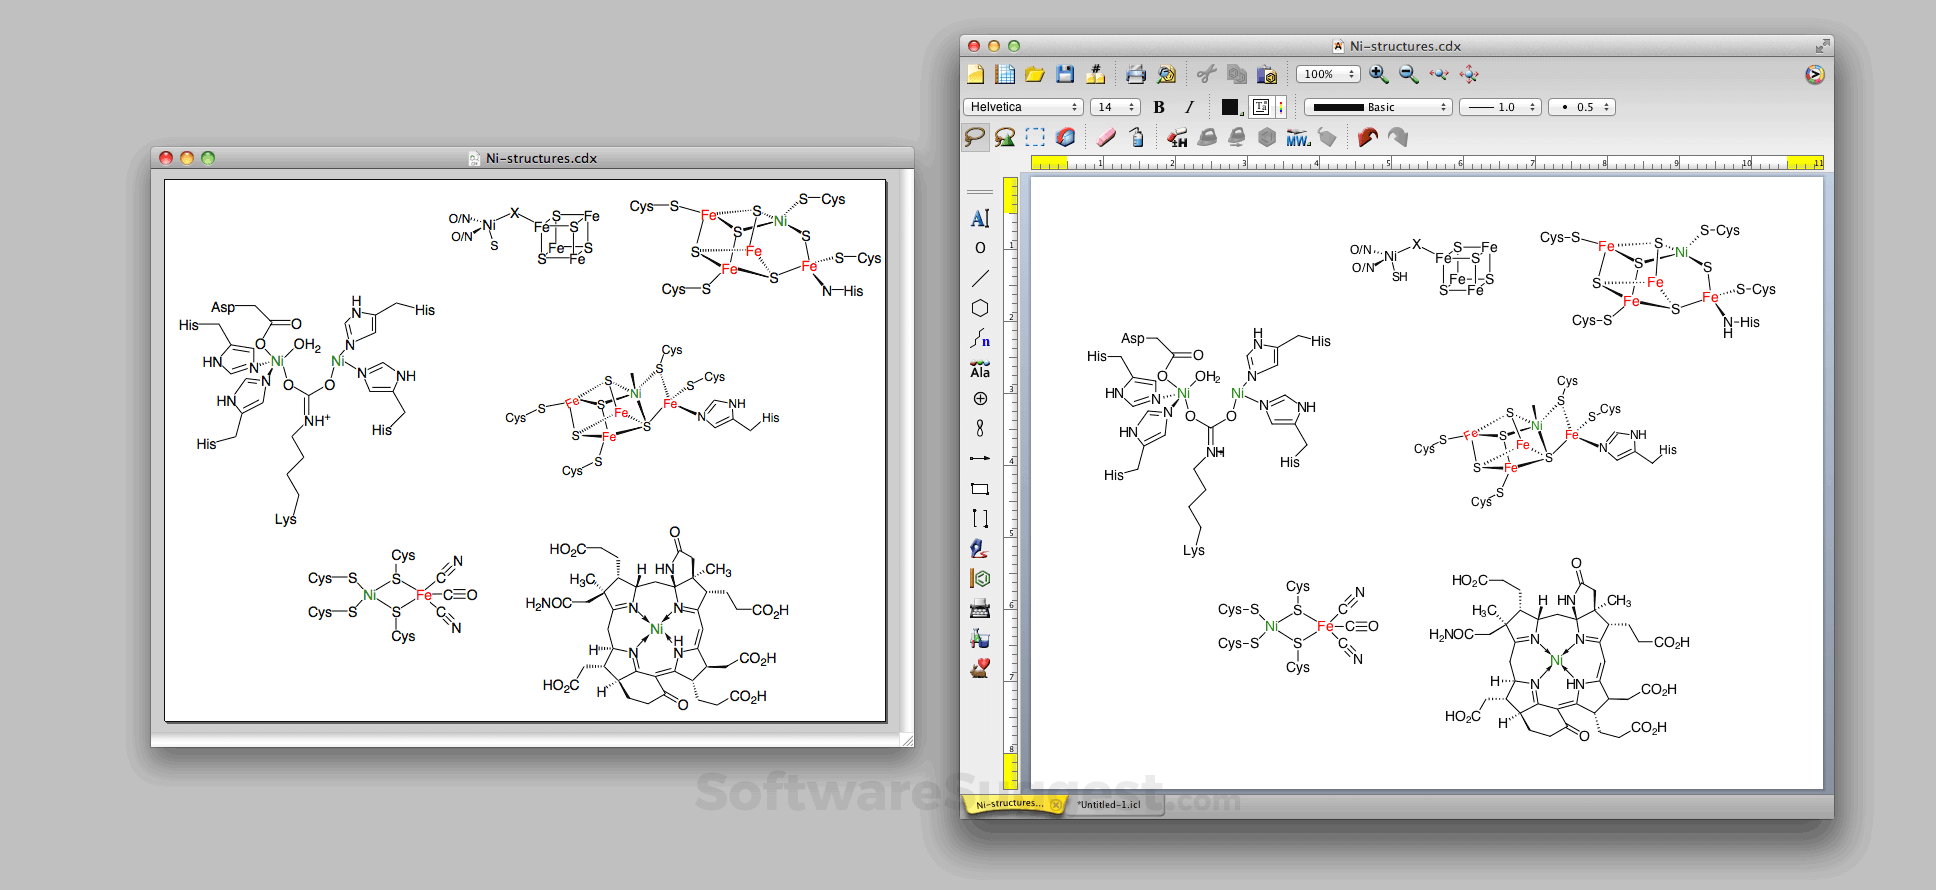 chemdoodle free student